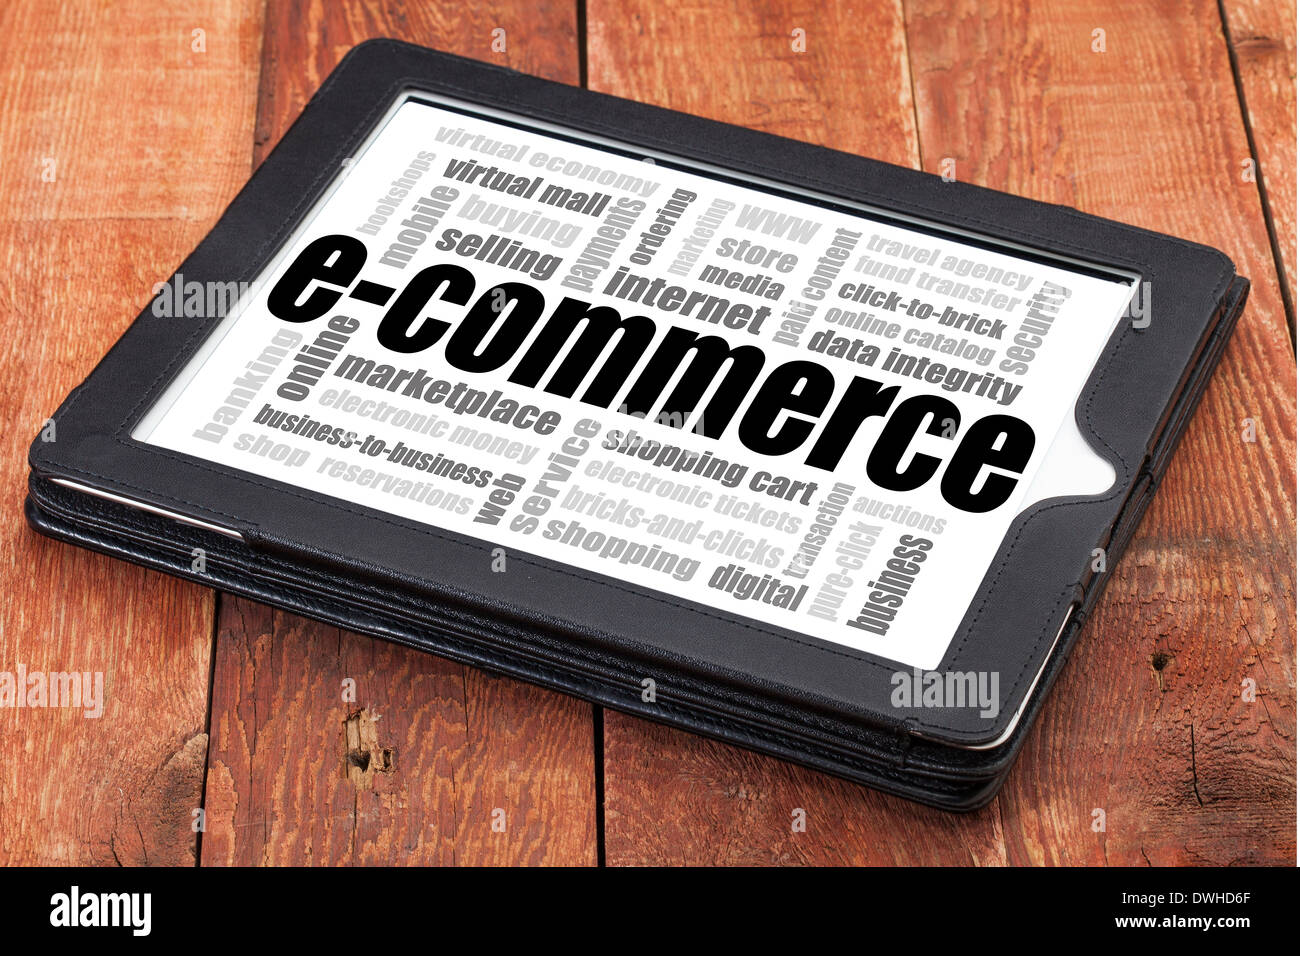 e-commerce word cloud - a digital tablet on a rustic wooden table Stock Photo